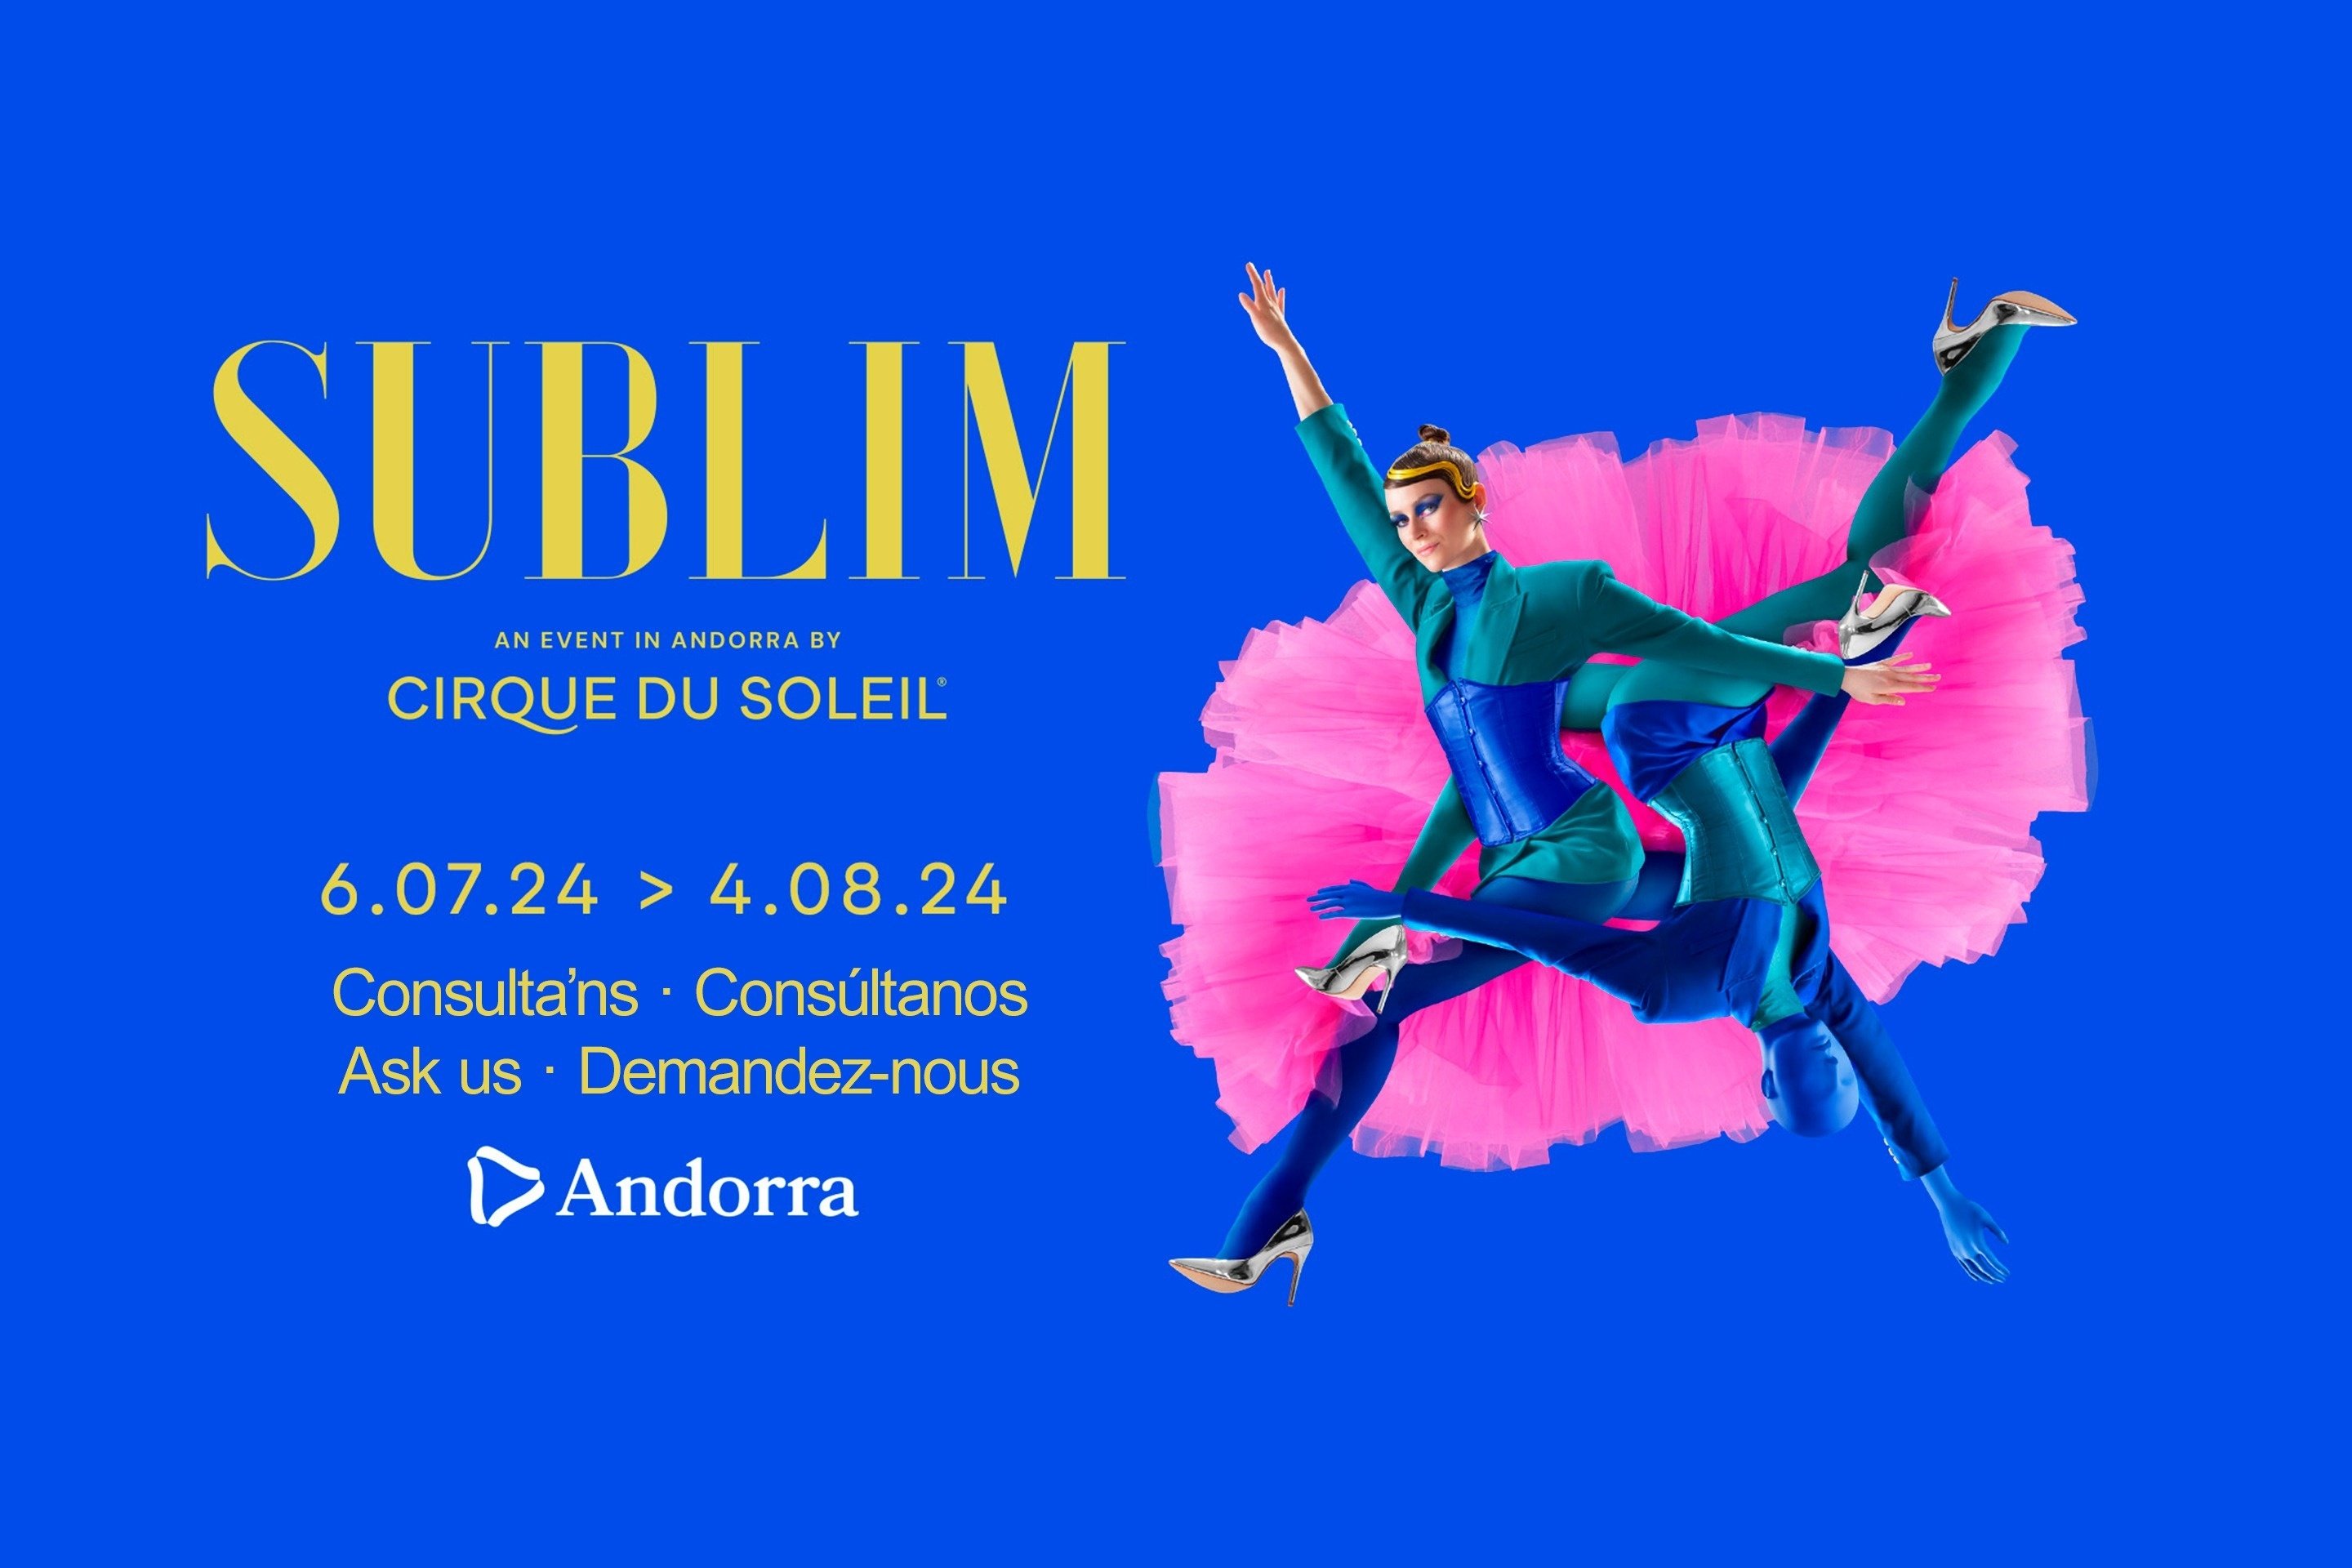 a poster for an event in andorra by cirque du soleil